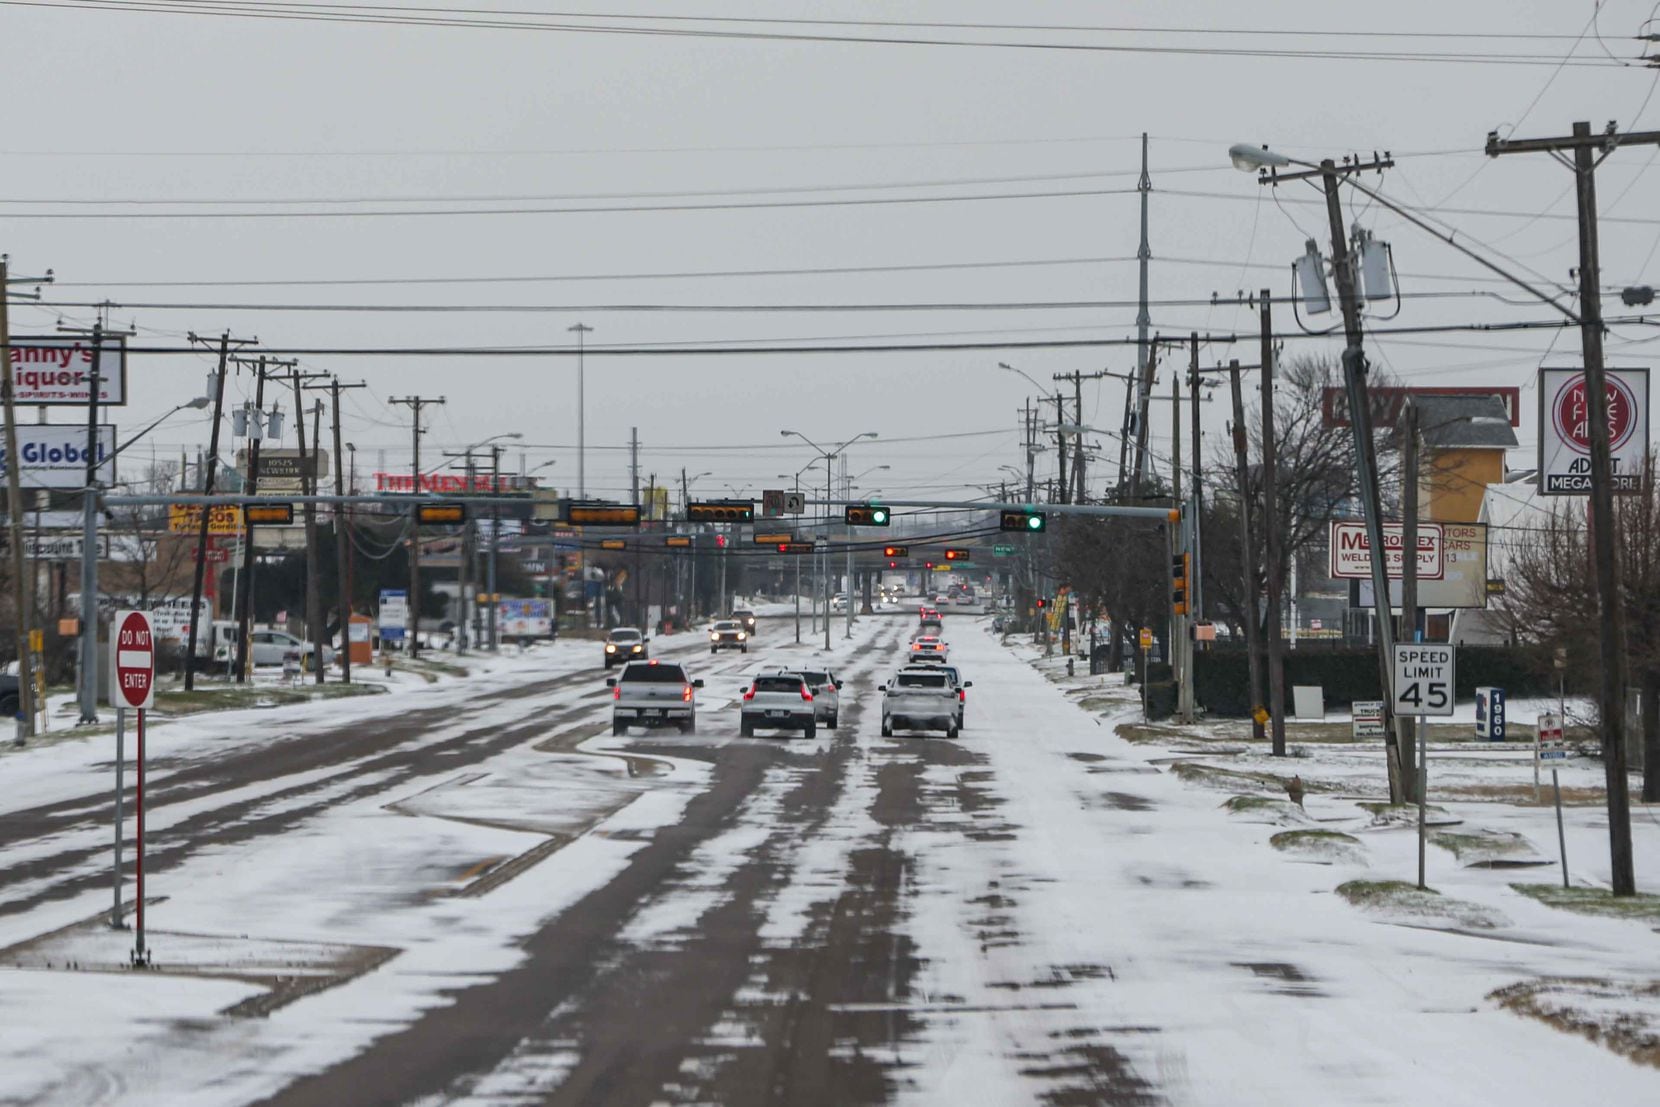 Light traffic on TX-12 Loop Northwest as it continues to snow and temperatures keep dropping...